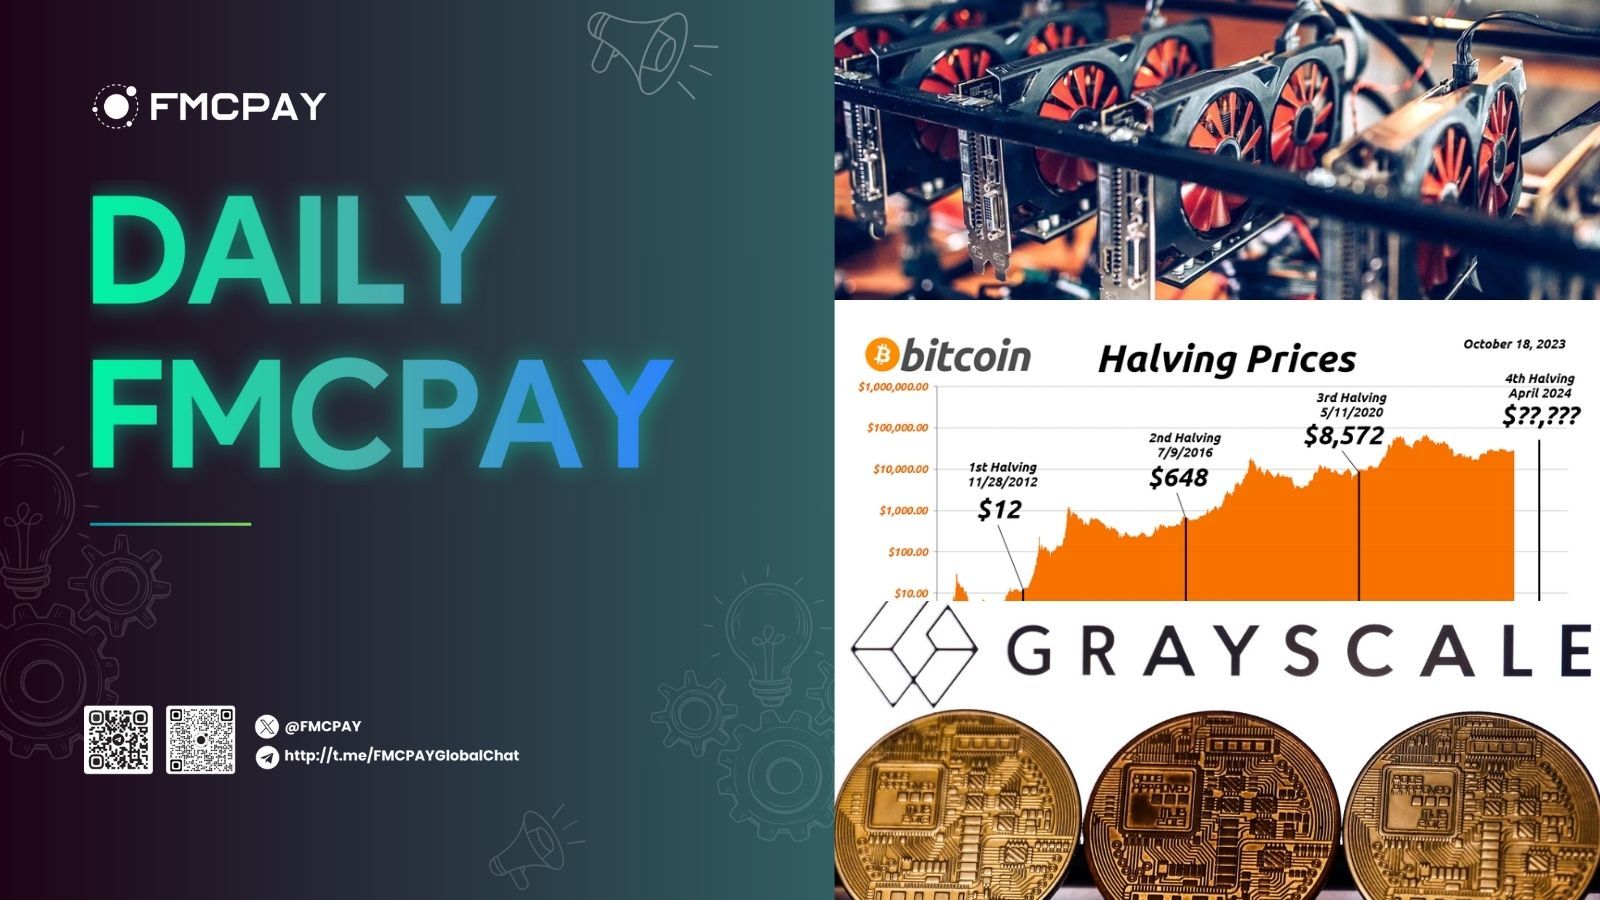 fmcpay bitcoin mining companies stocks take a significant drop before halving event